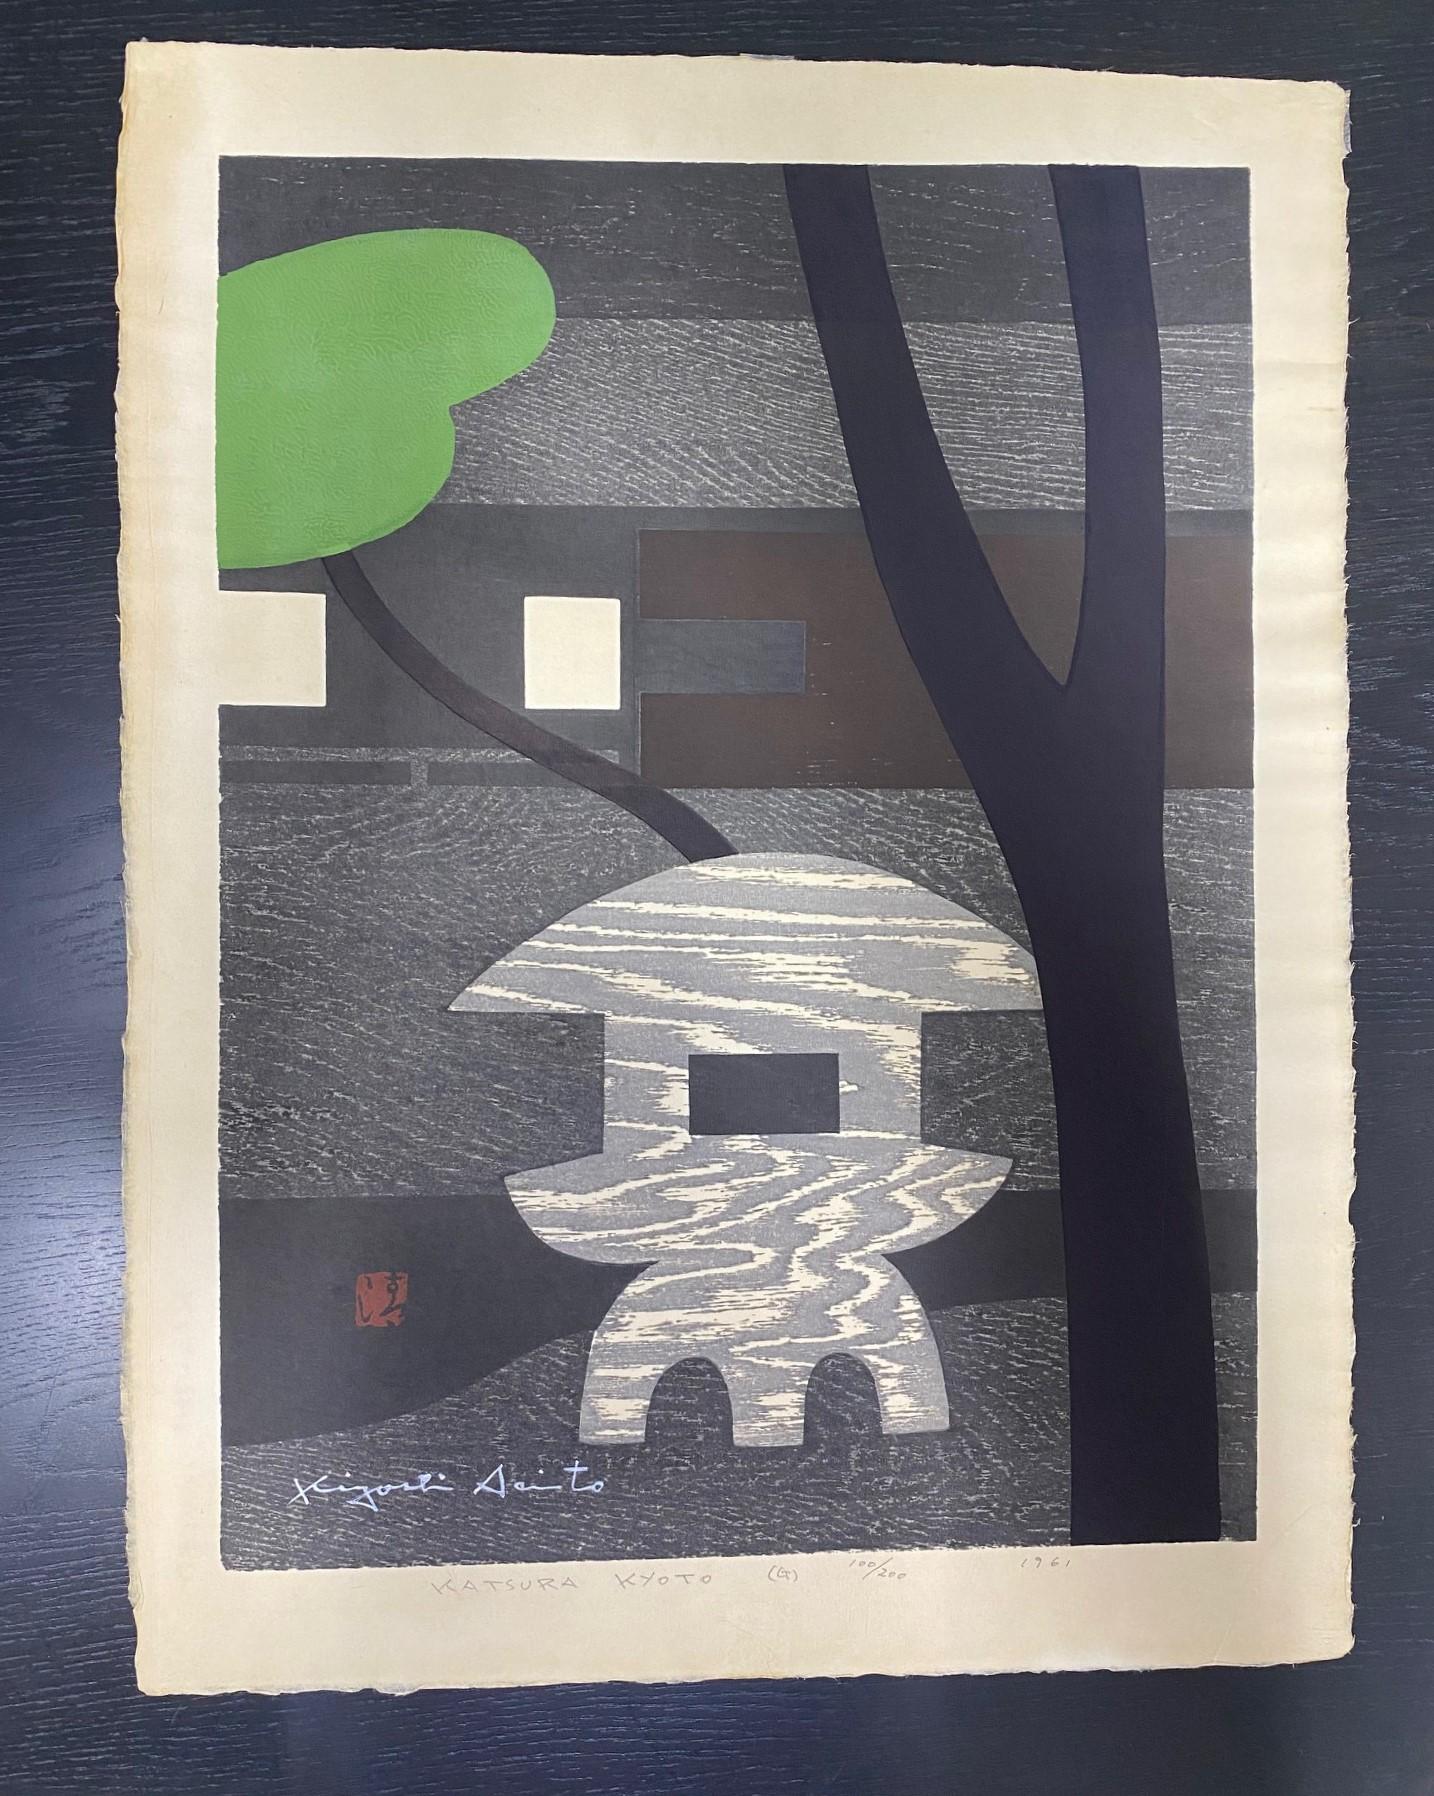 A beautifully composed woodblock print by famed Japanese printmaker Kiyoshi Saito. Many consider Saito to be one of the most important, if not the most important, contemporary Japanese printmakers of the 20th century. This print, titled 